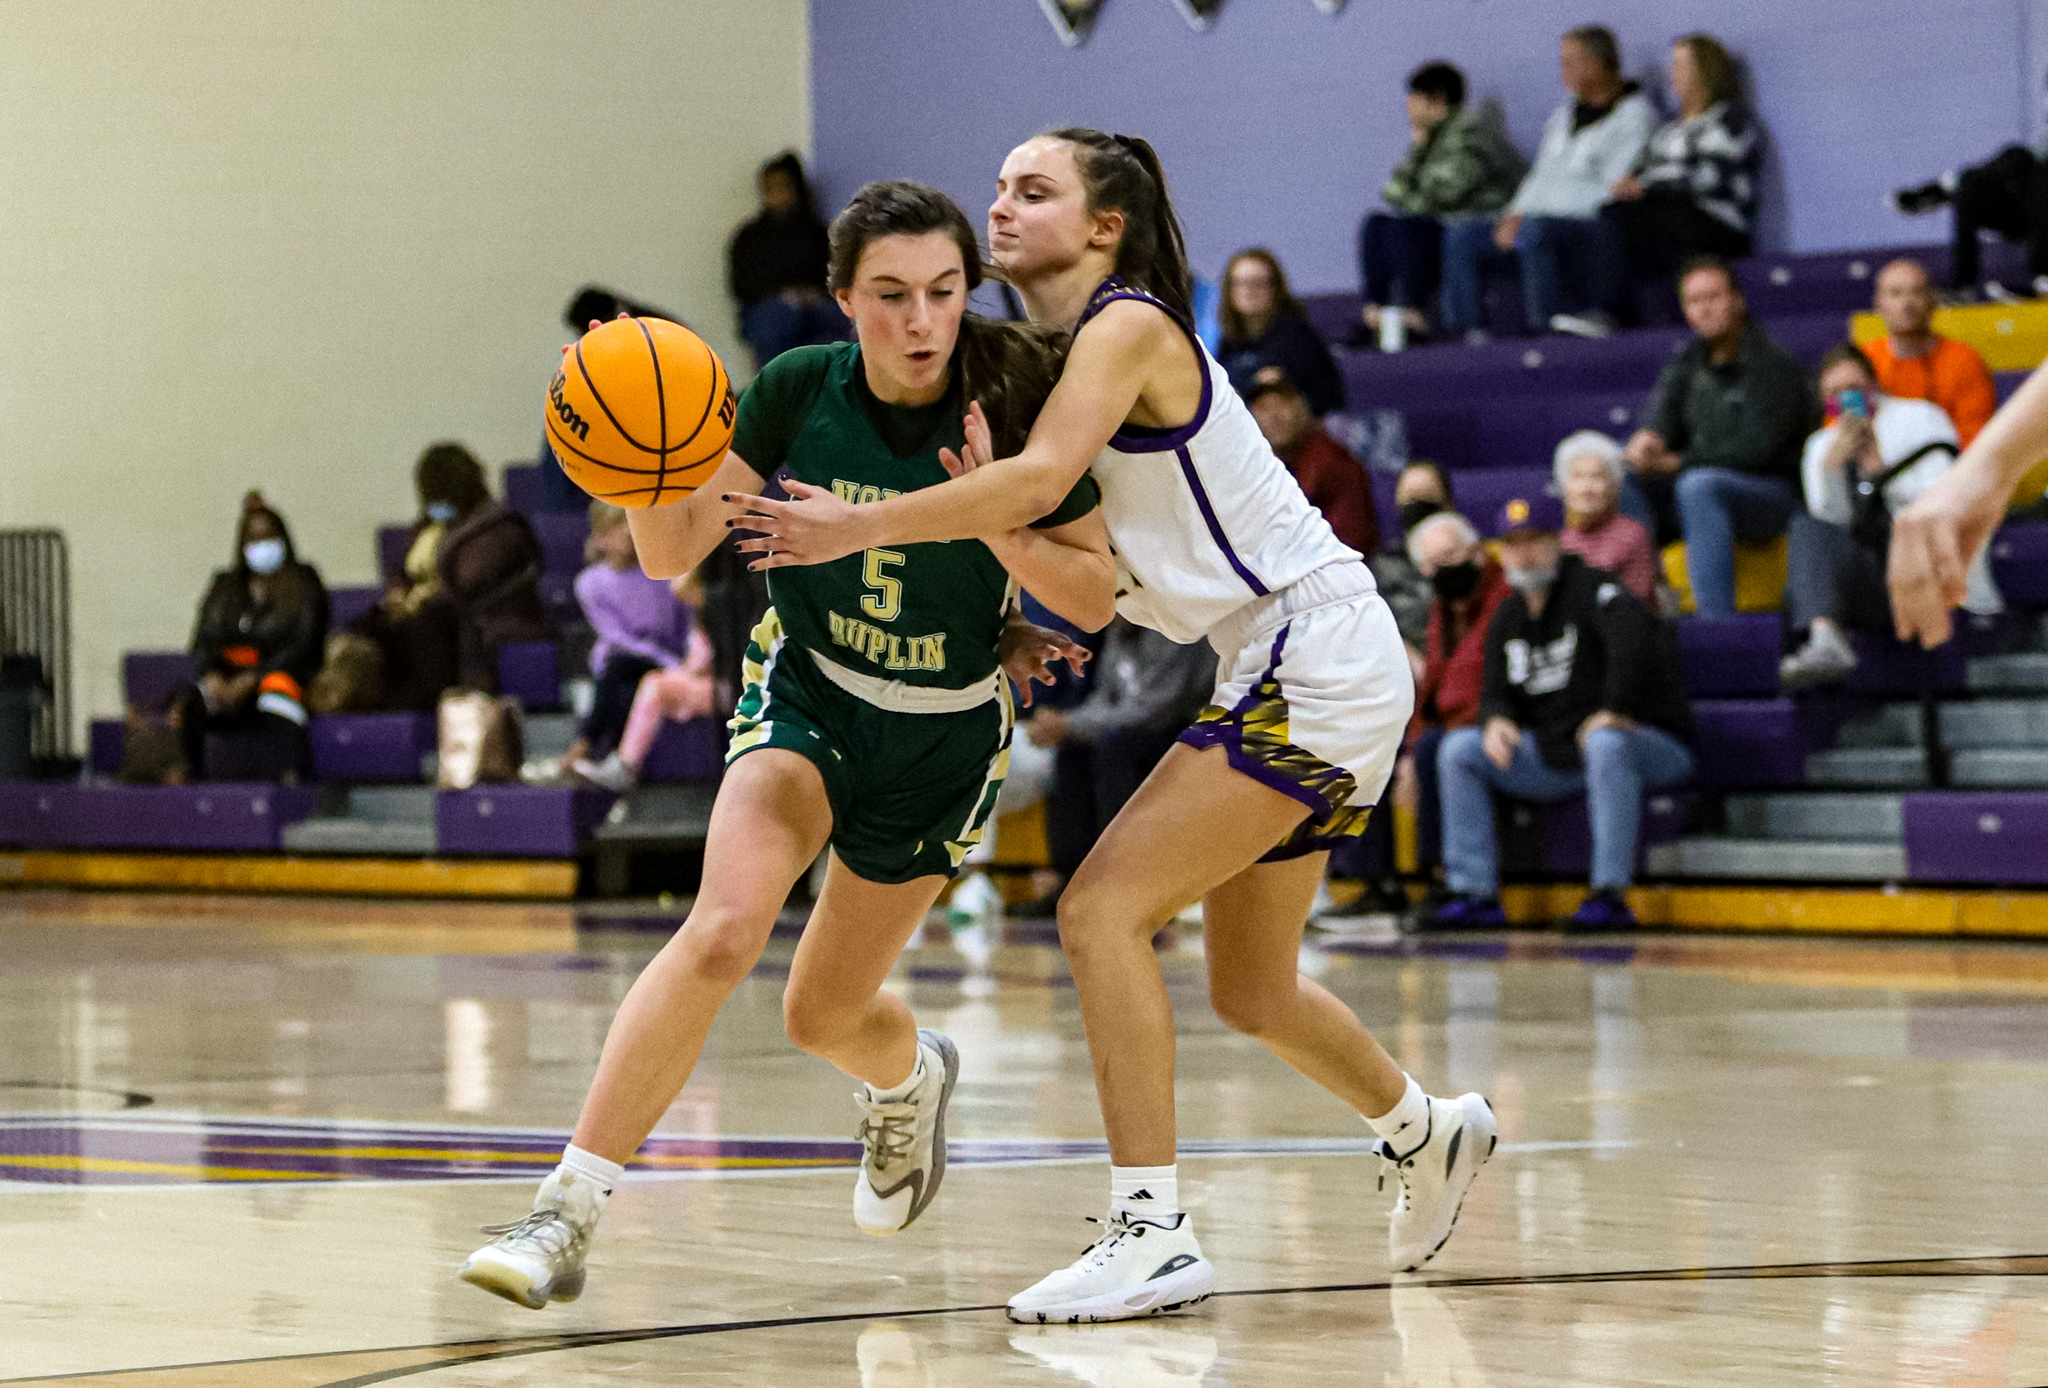 Girls Basketball: North Duplin Defeats Rosewood, Improves To 13-1 (PHOTO GALLERY)